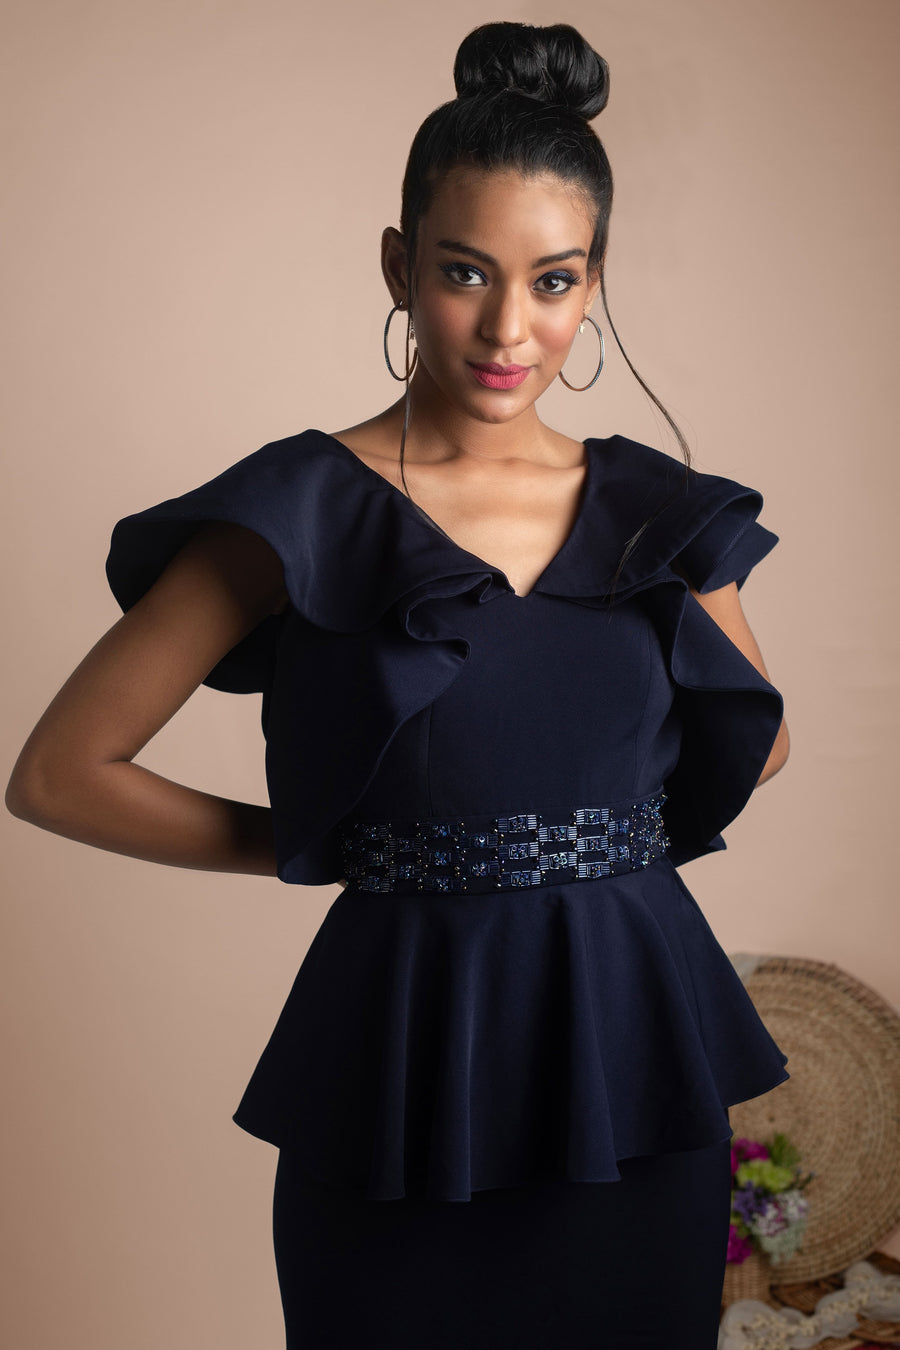 Mehak Murpana| Ruffle Gown | Stylish formal and party wear.